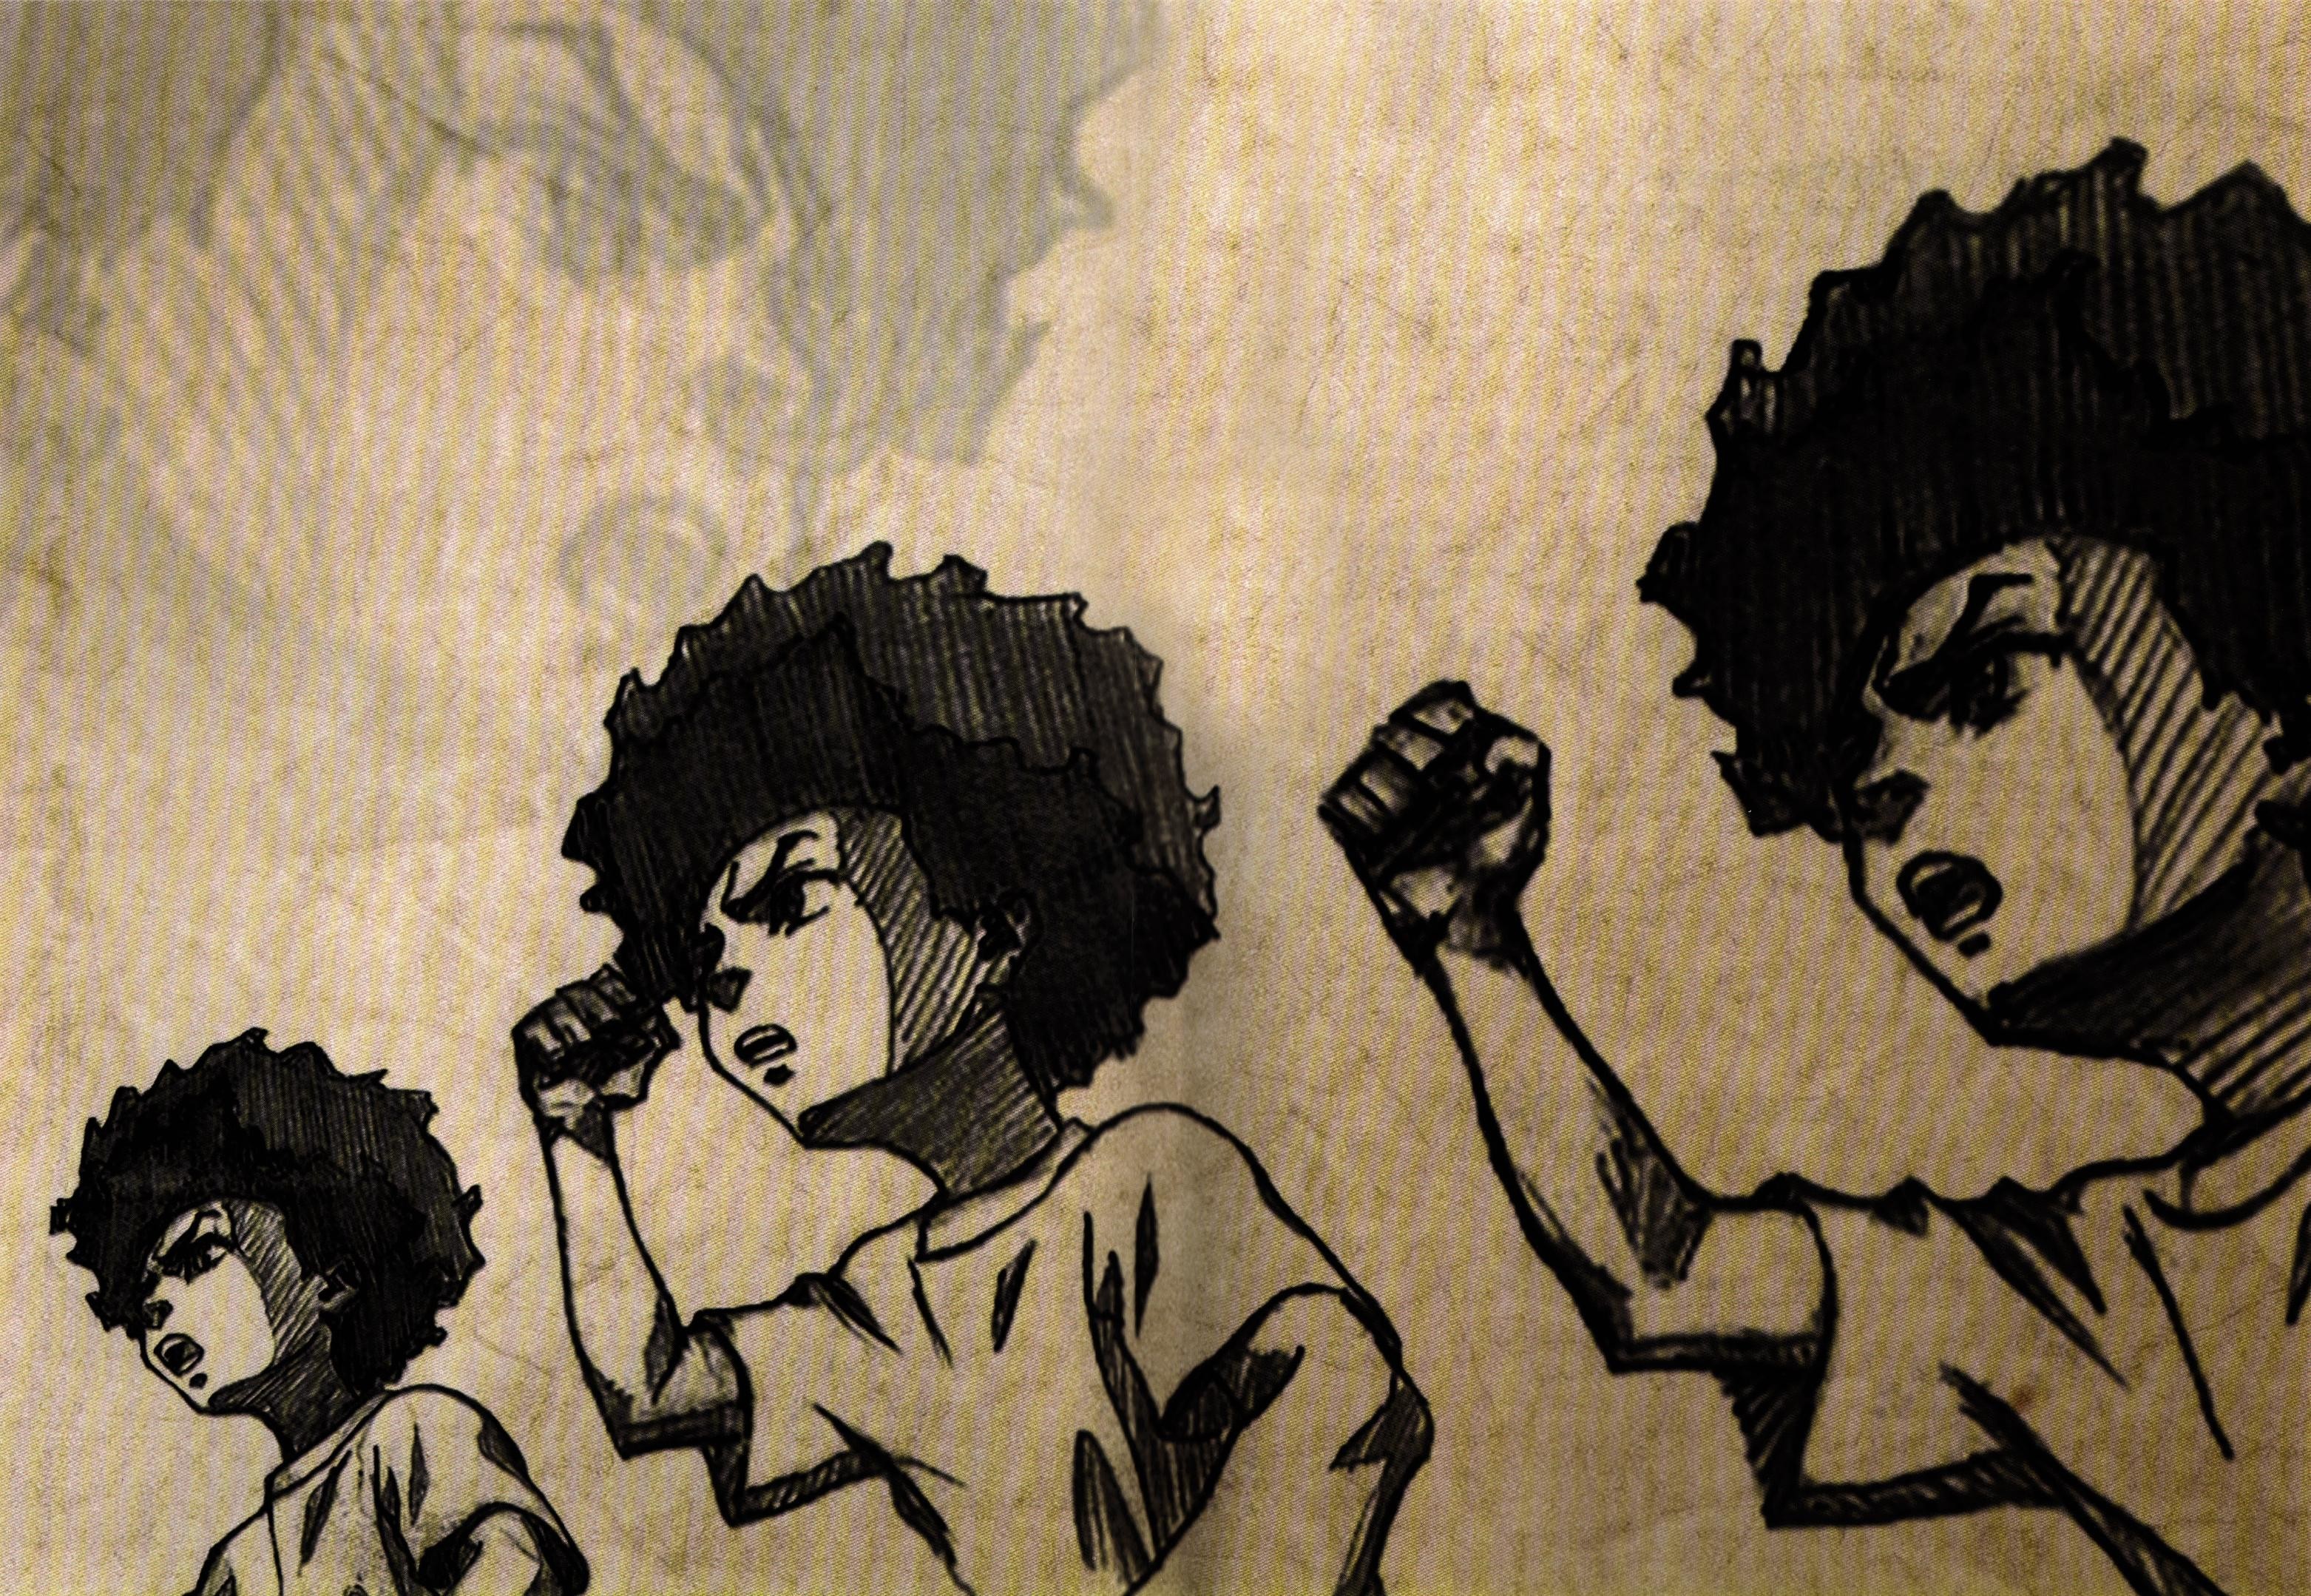 Boondocks Wallpaper APK for Android Download